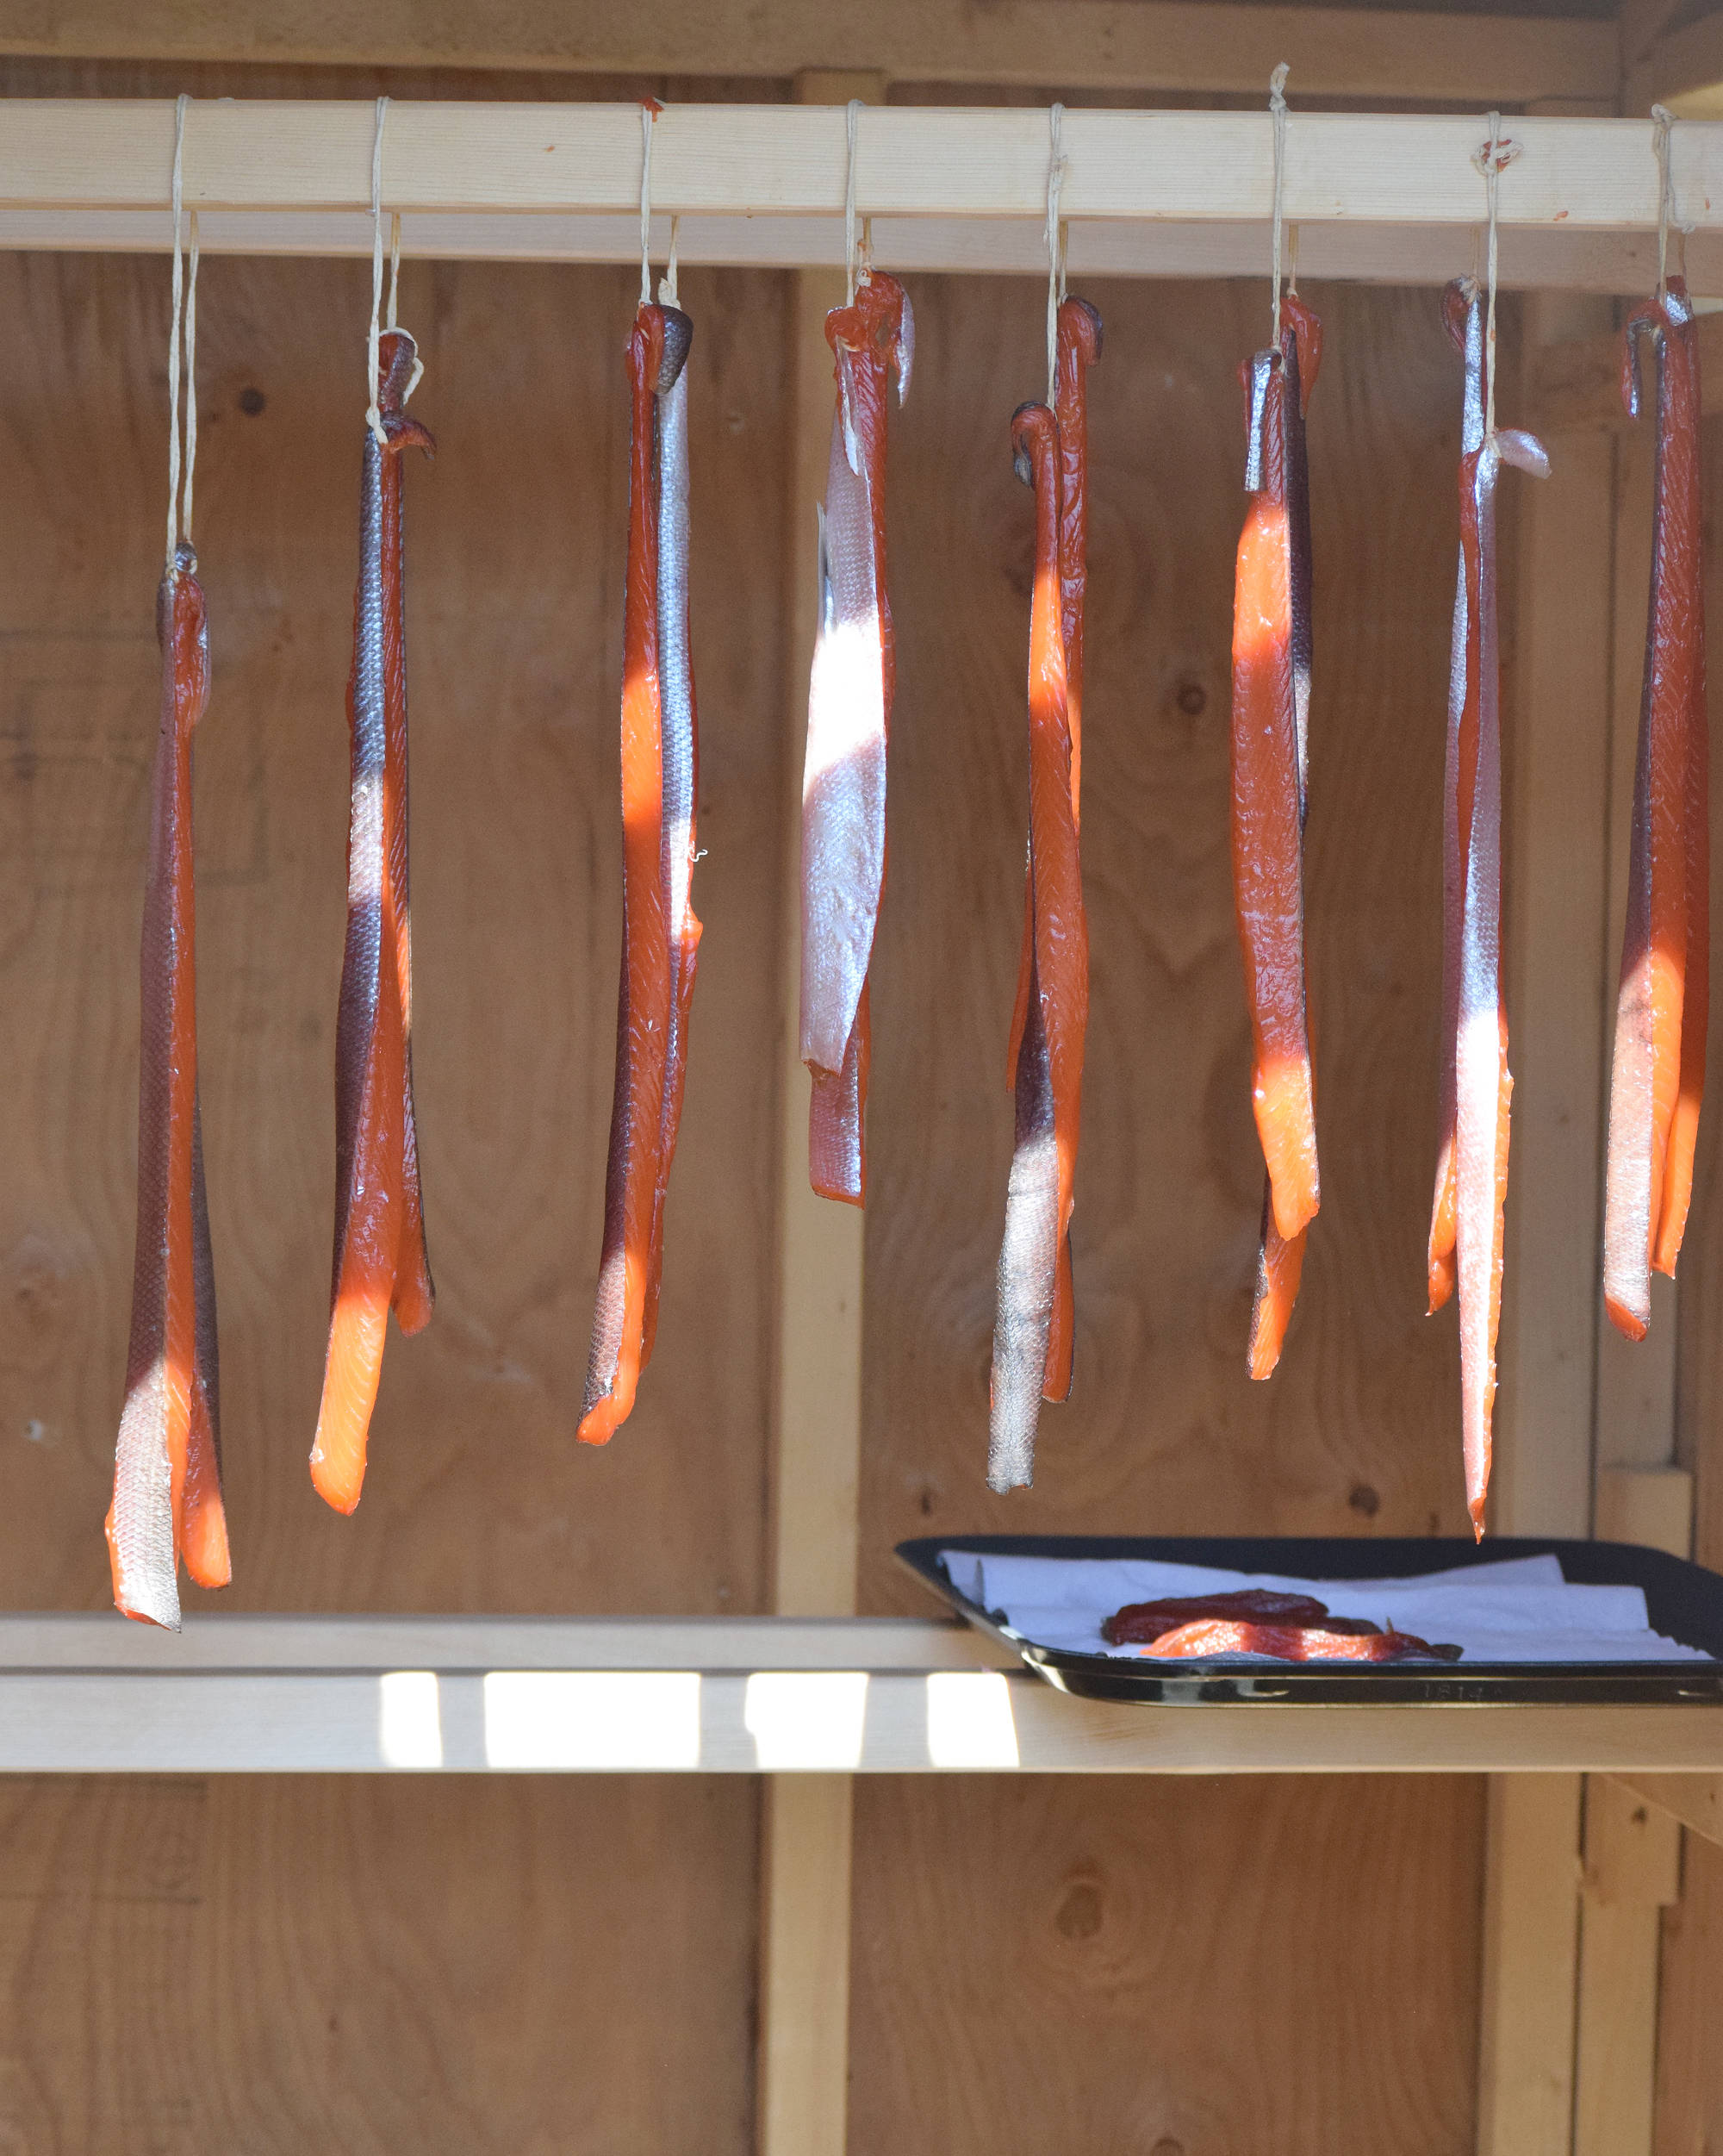 Smoked salmon strips hang in a smoke shed during a demonstration July 20, 2018, at the Kenai National Wildlife Refuge. (Photo by Joey Klecka/Peninsula Clarion)